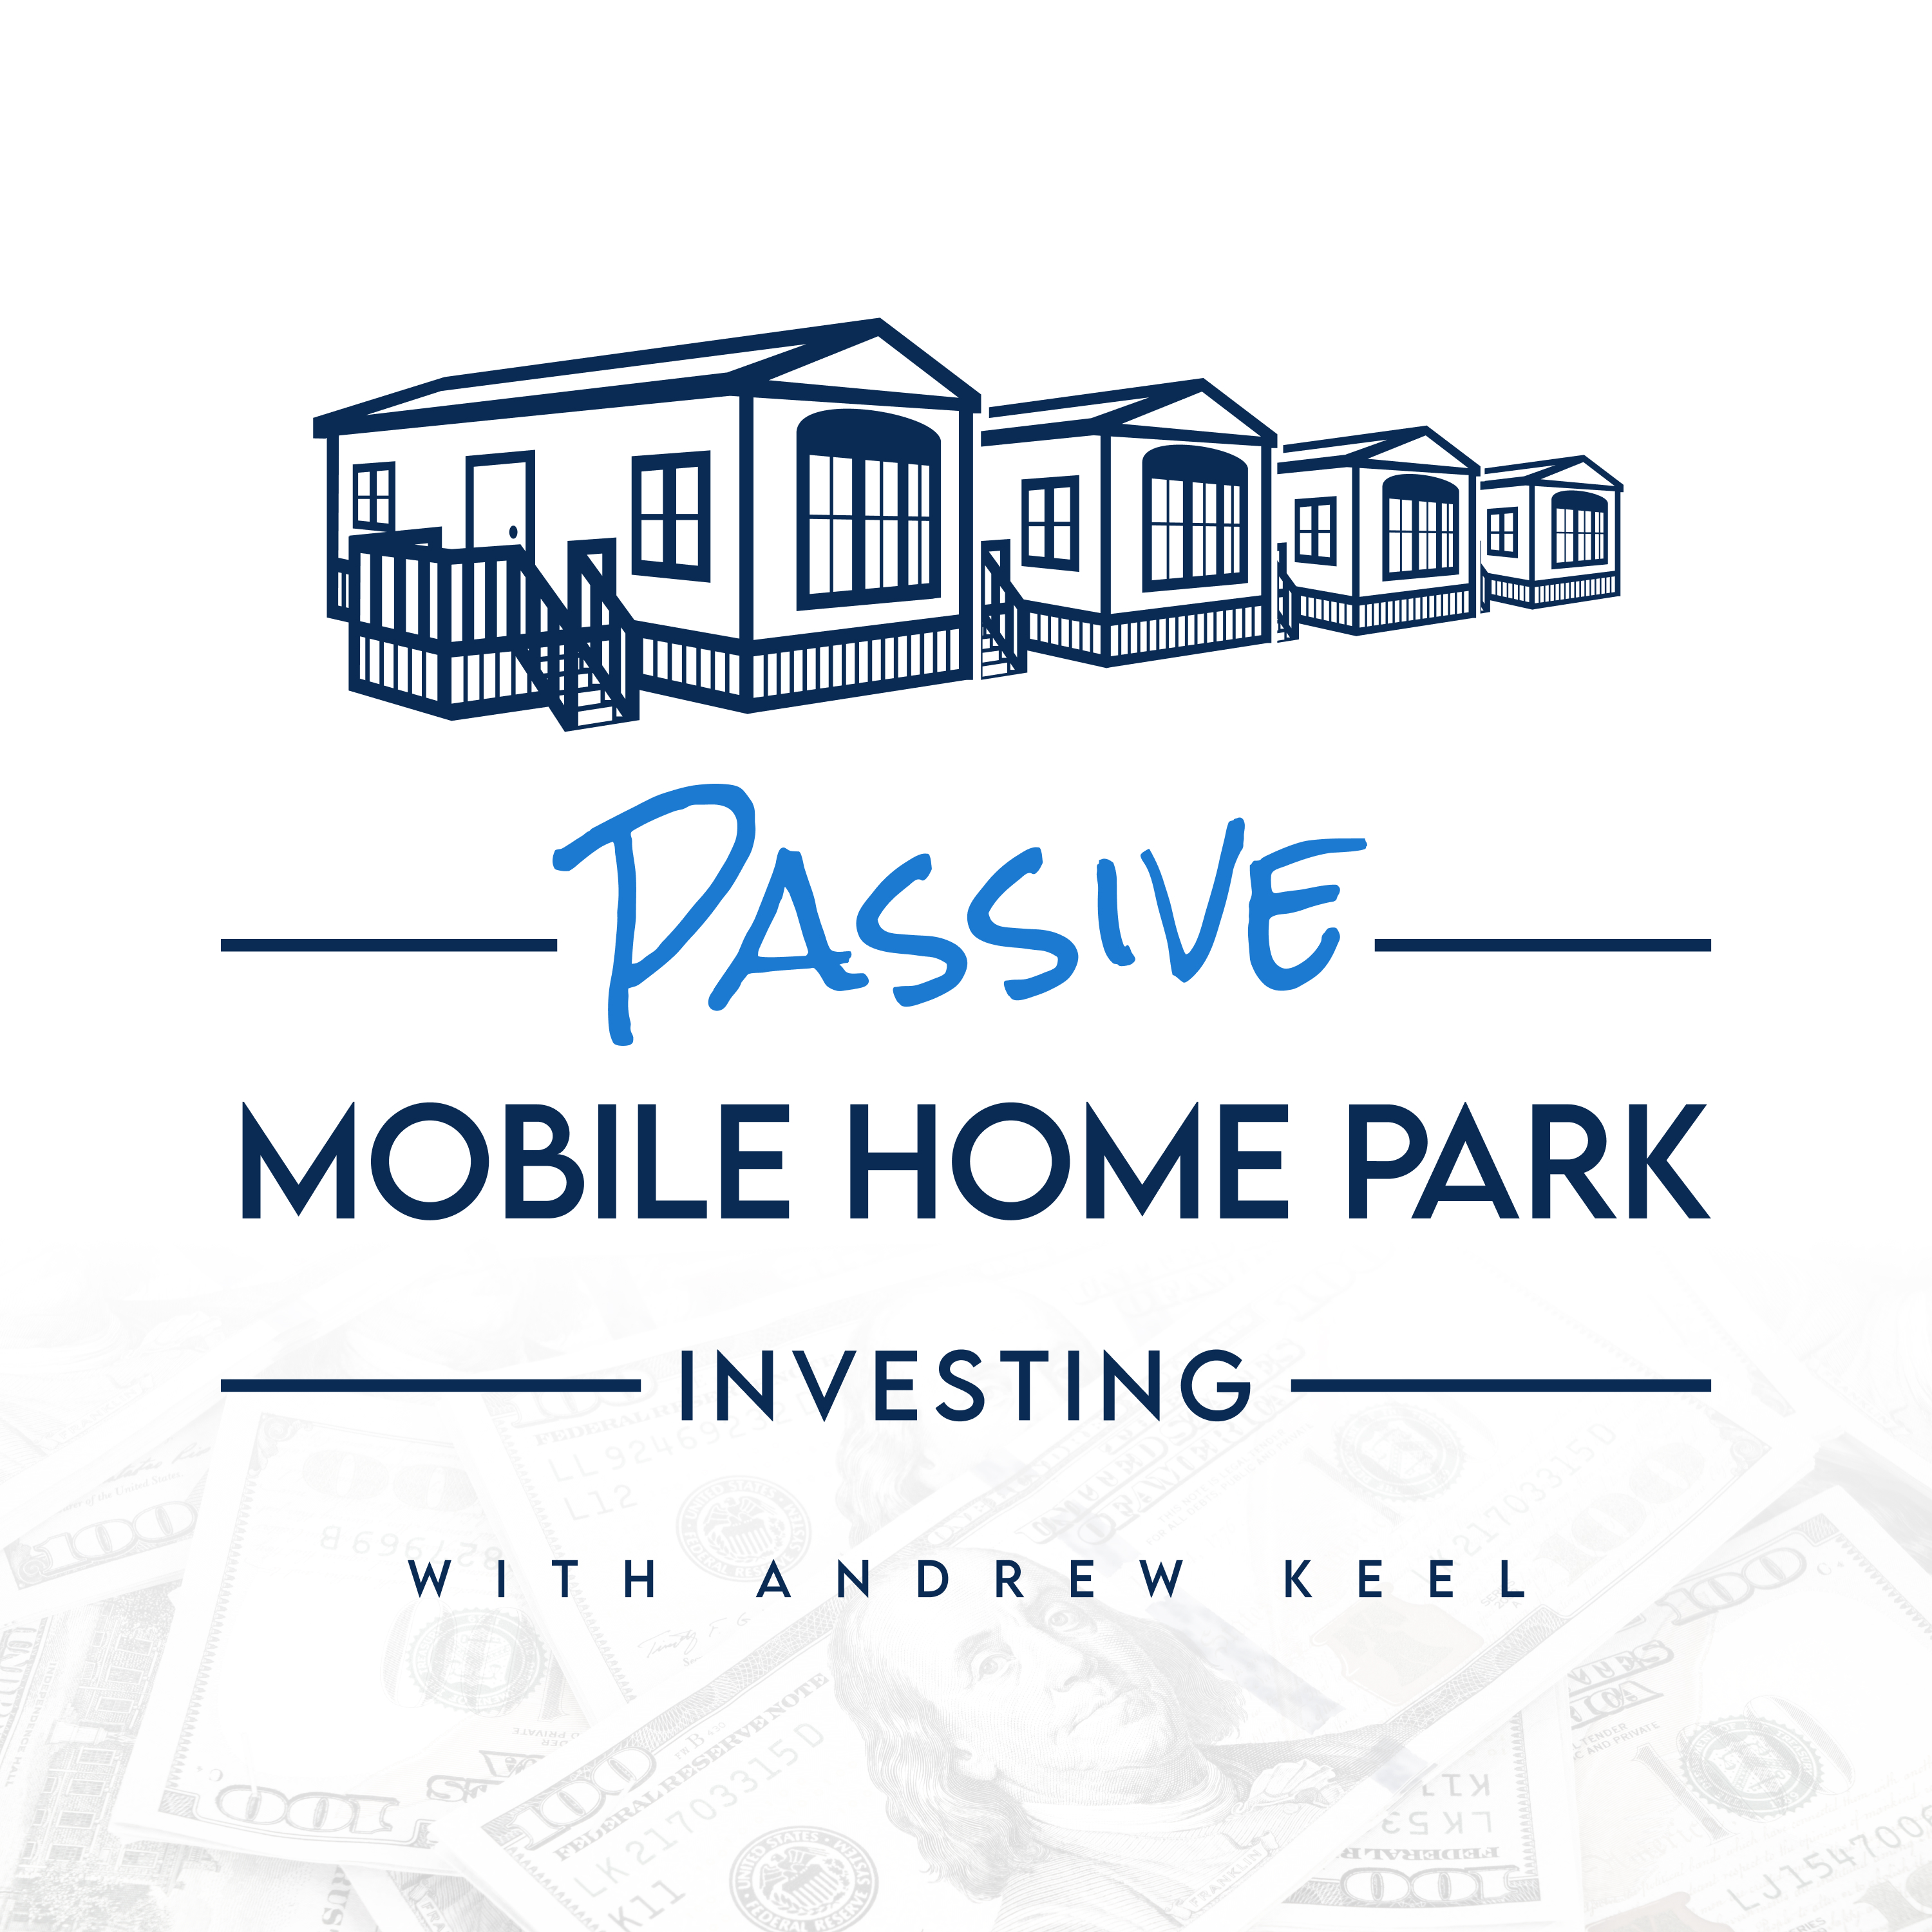 Mobile Home Parks have High NOI Growth Opportunities